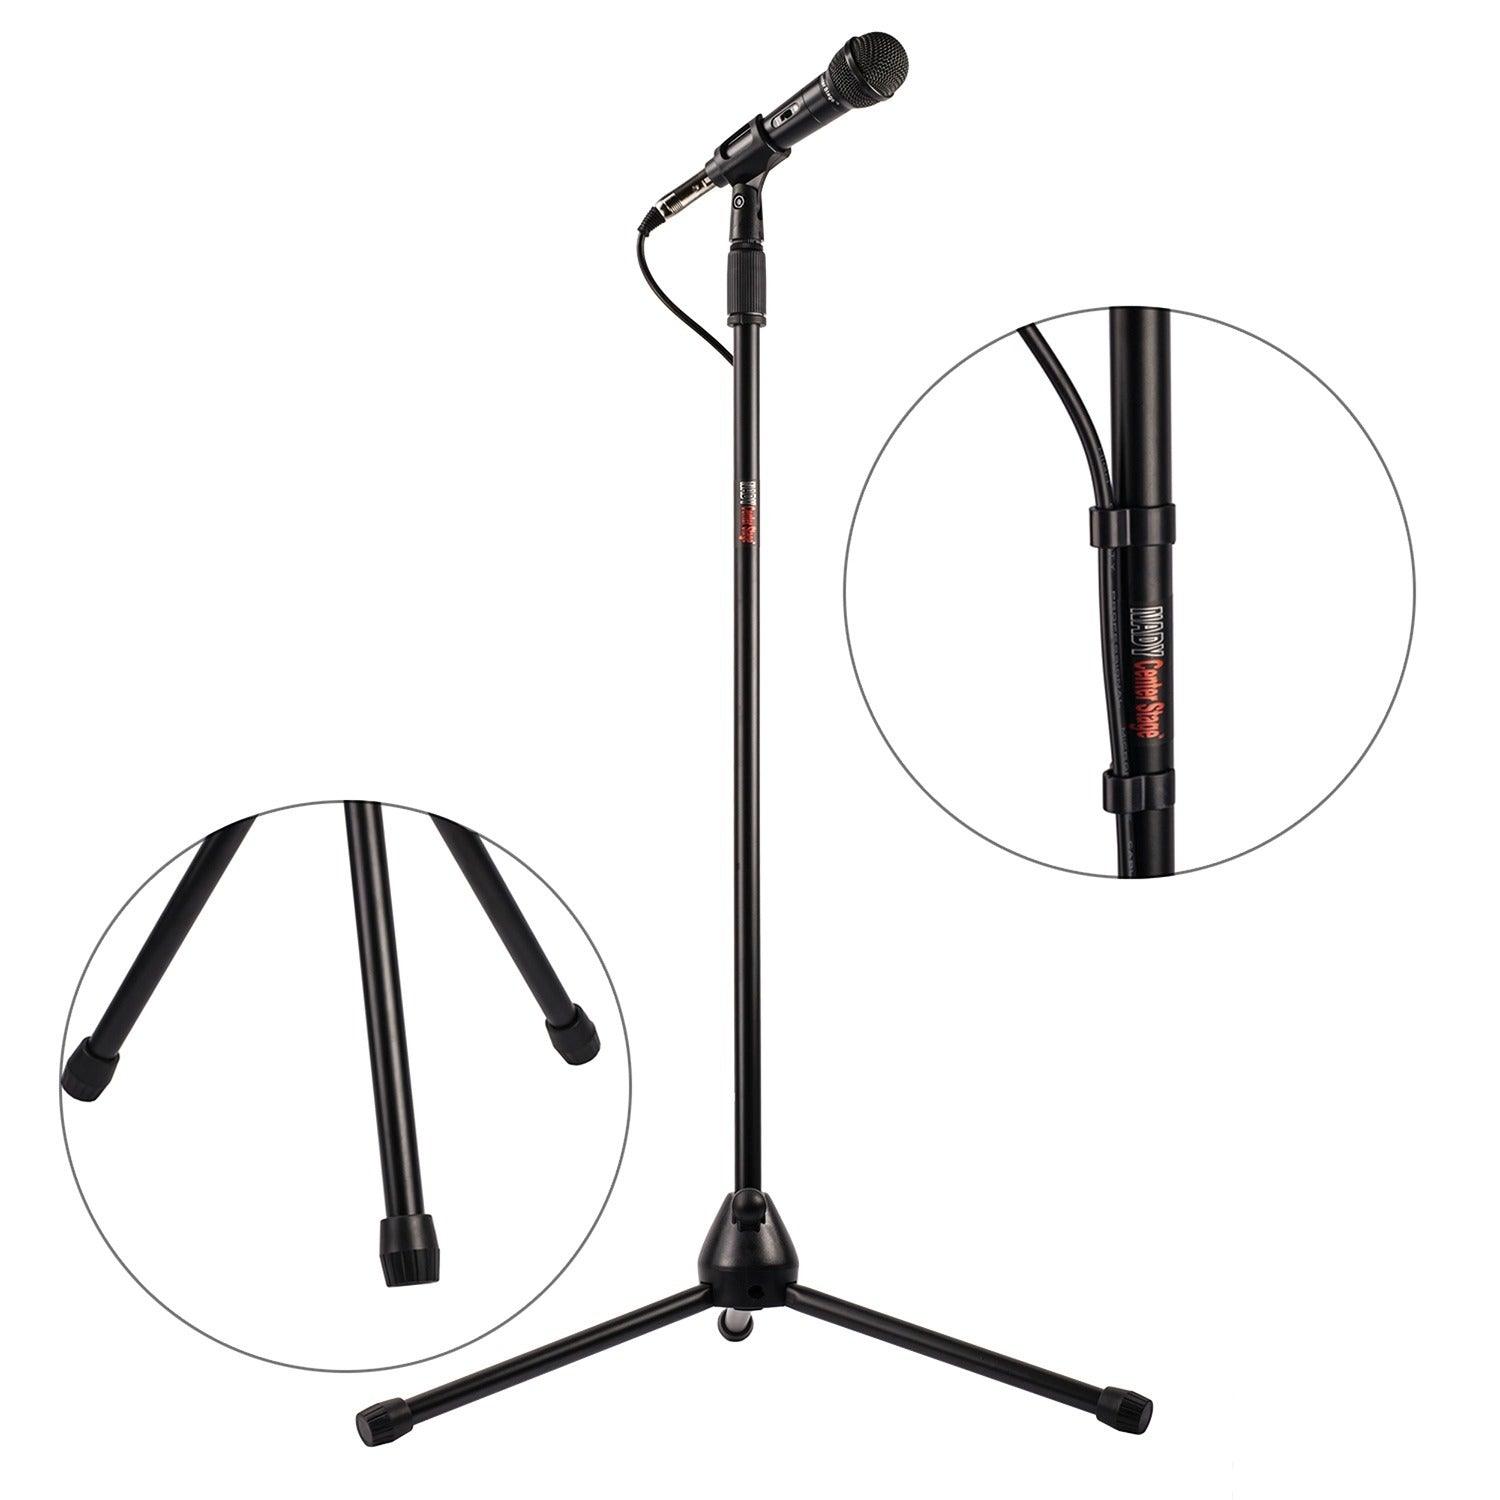 Nady CenterStage MSC3 CenterStage MSC3 Professional Dynamic Microphone with Stand - FSSA Global Bullet